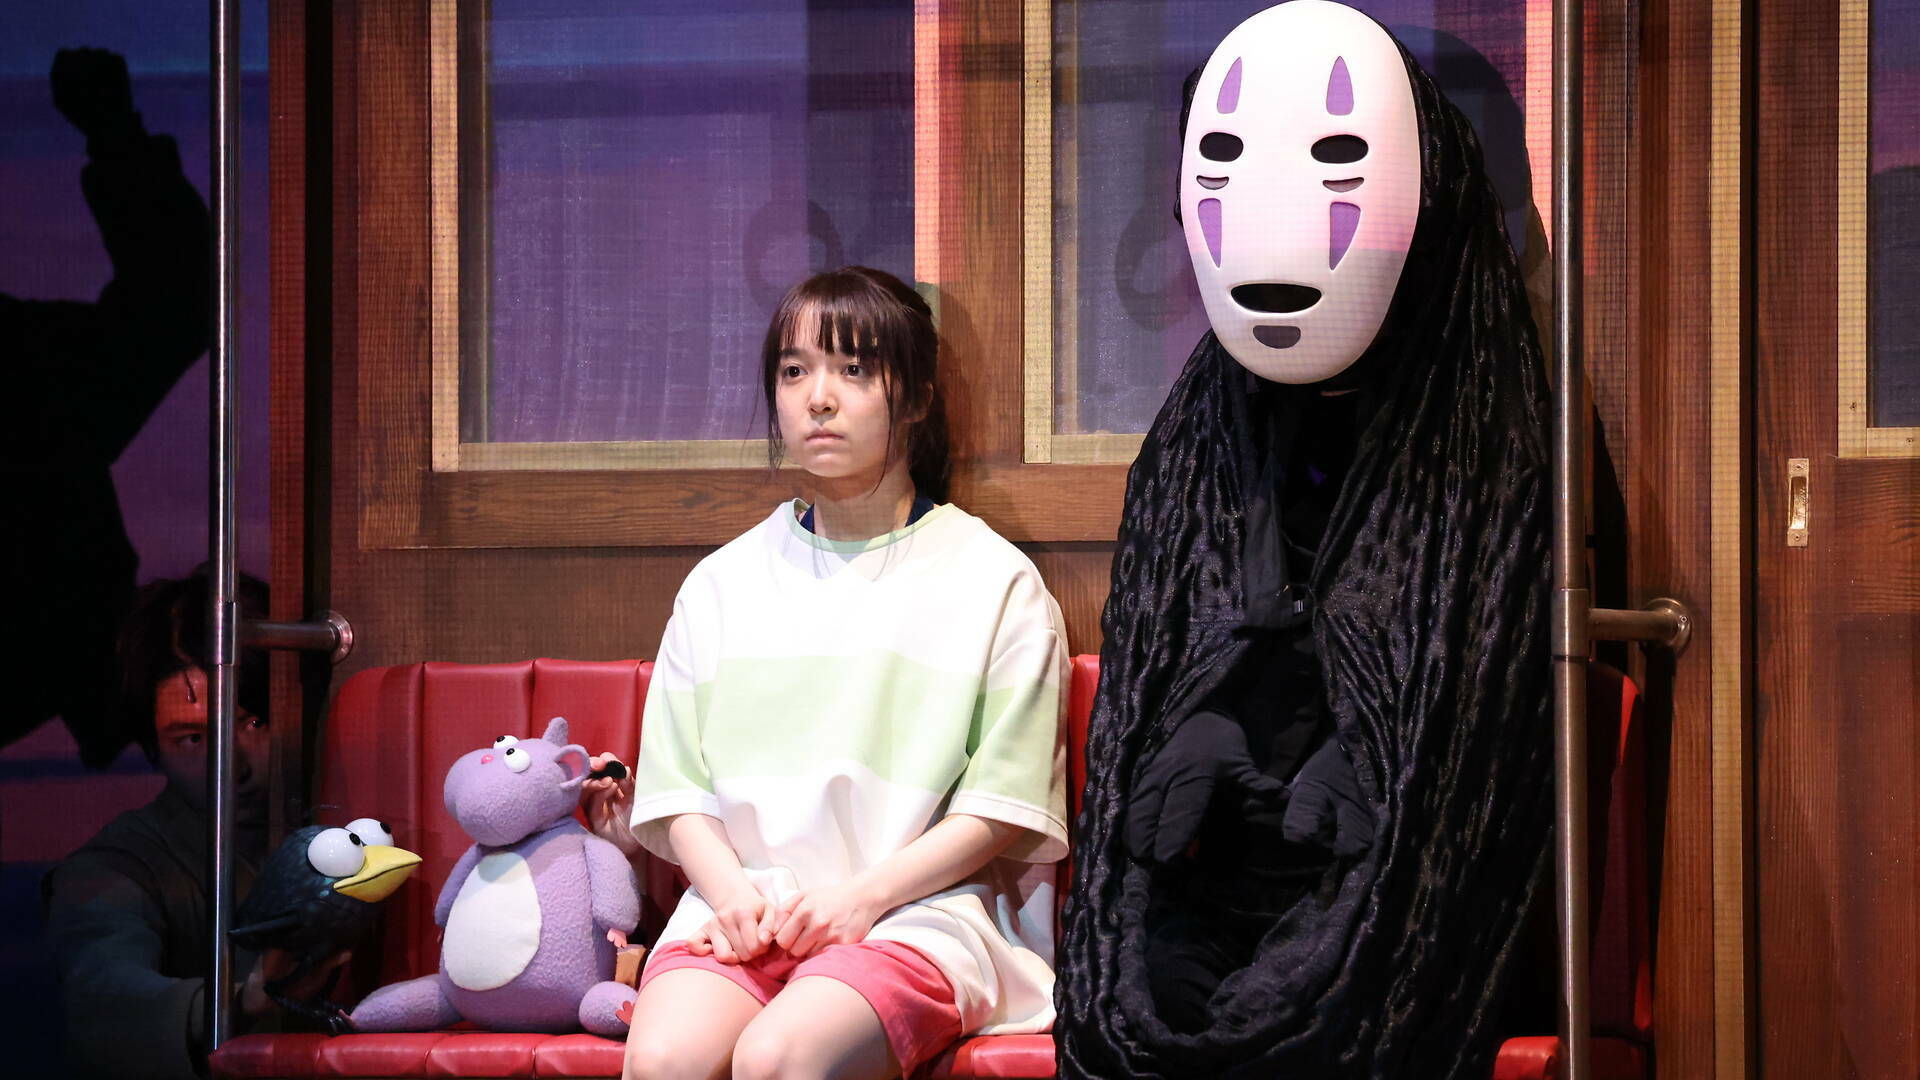 a-massive-stage-adaptation-of-studio-ghibli’s-‘spirited-away’-is-coming-to-the-west-end-next-year